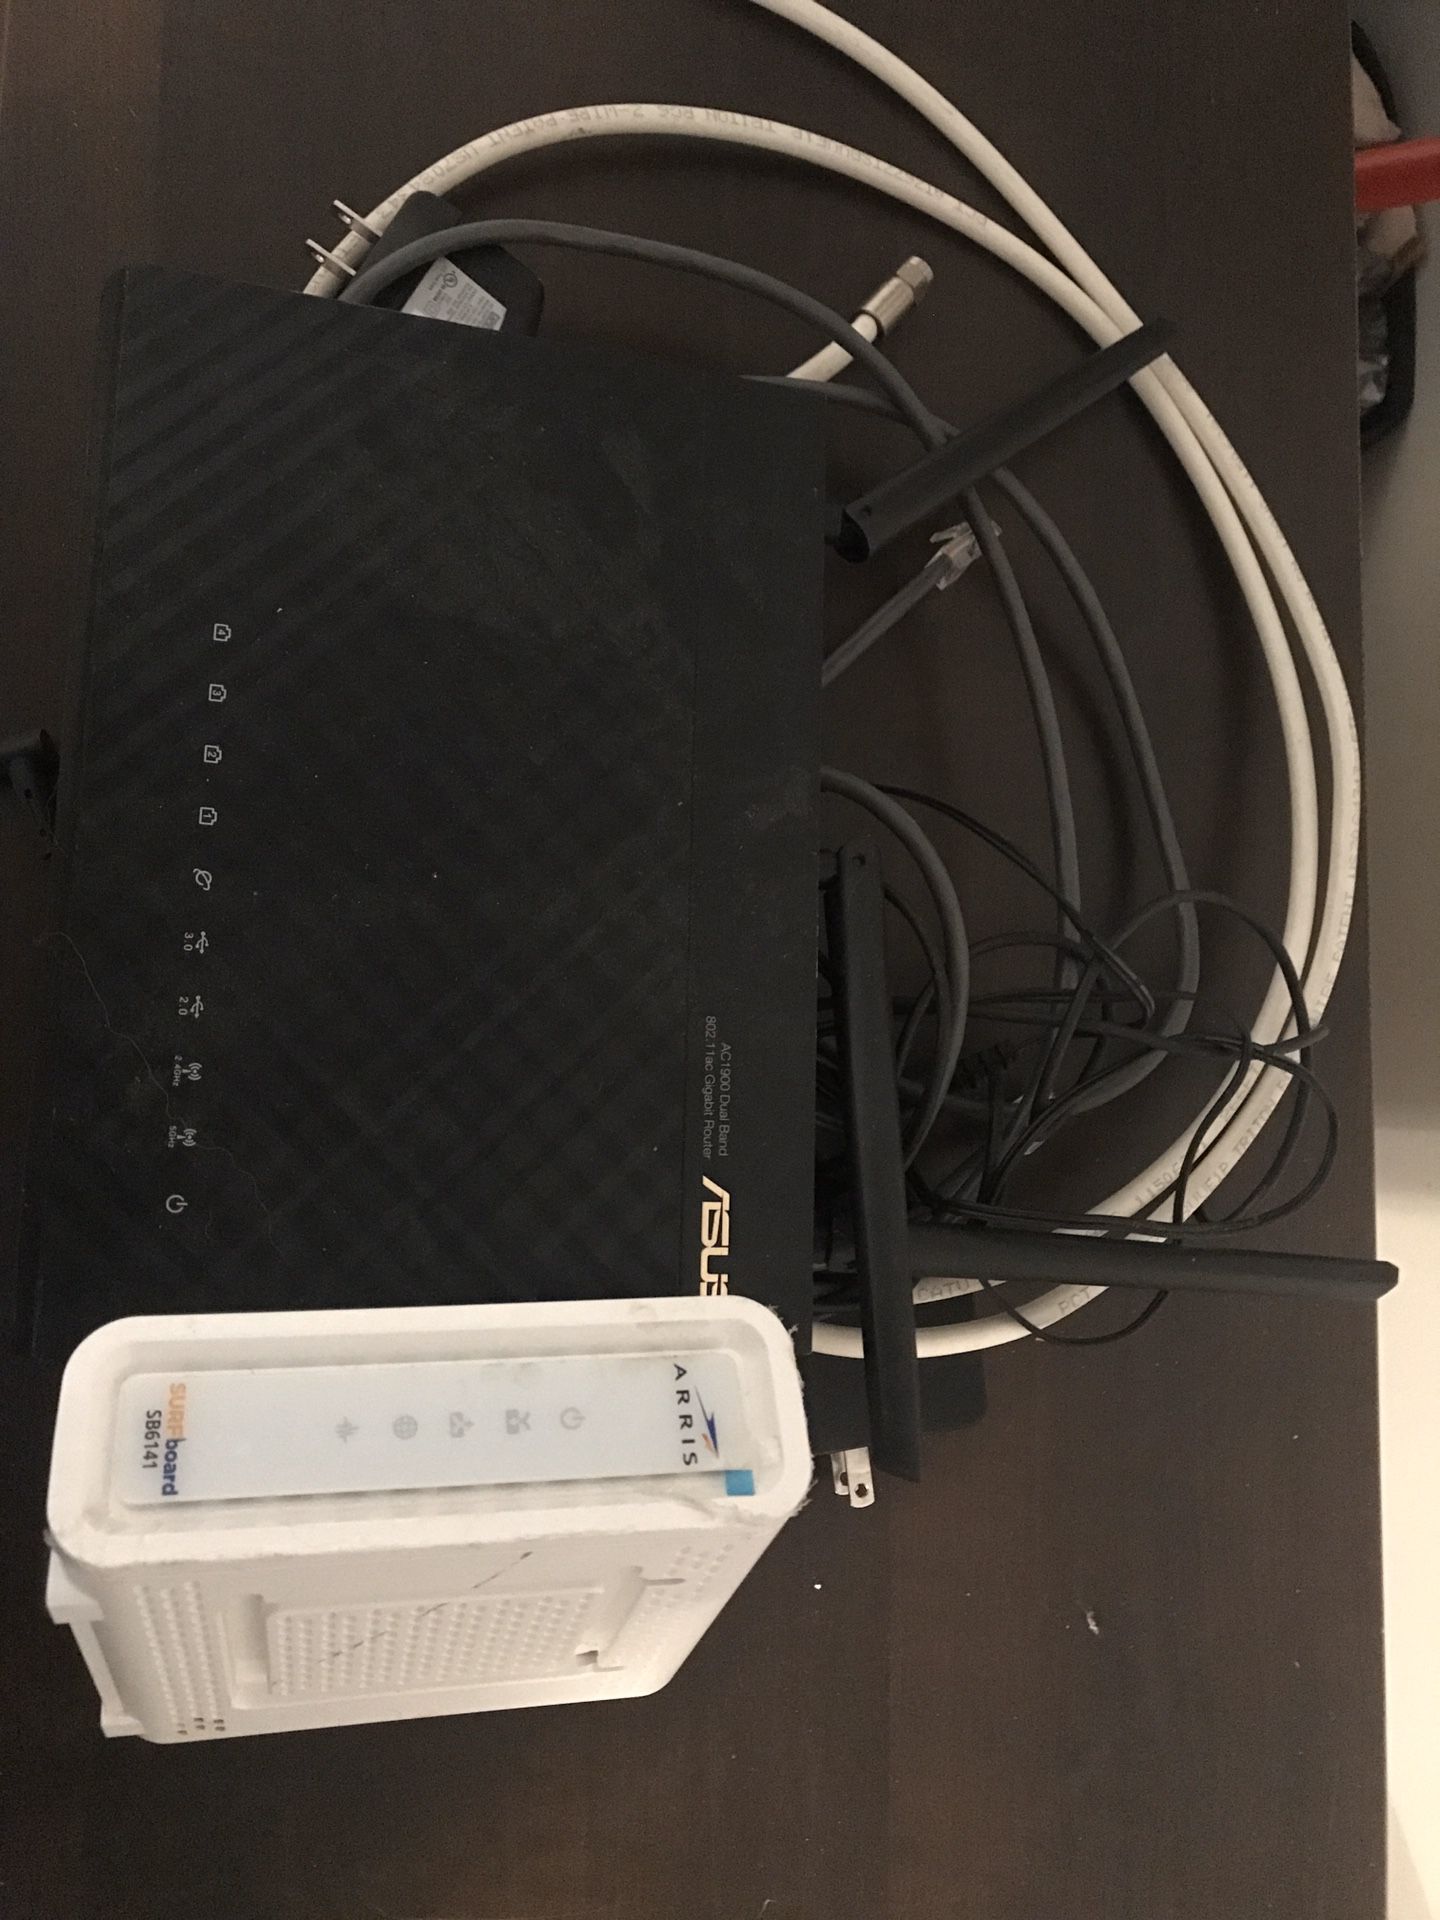 Internet Router and Modem